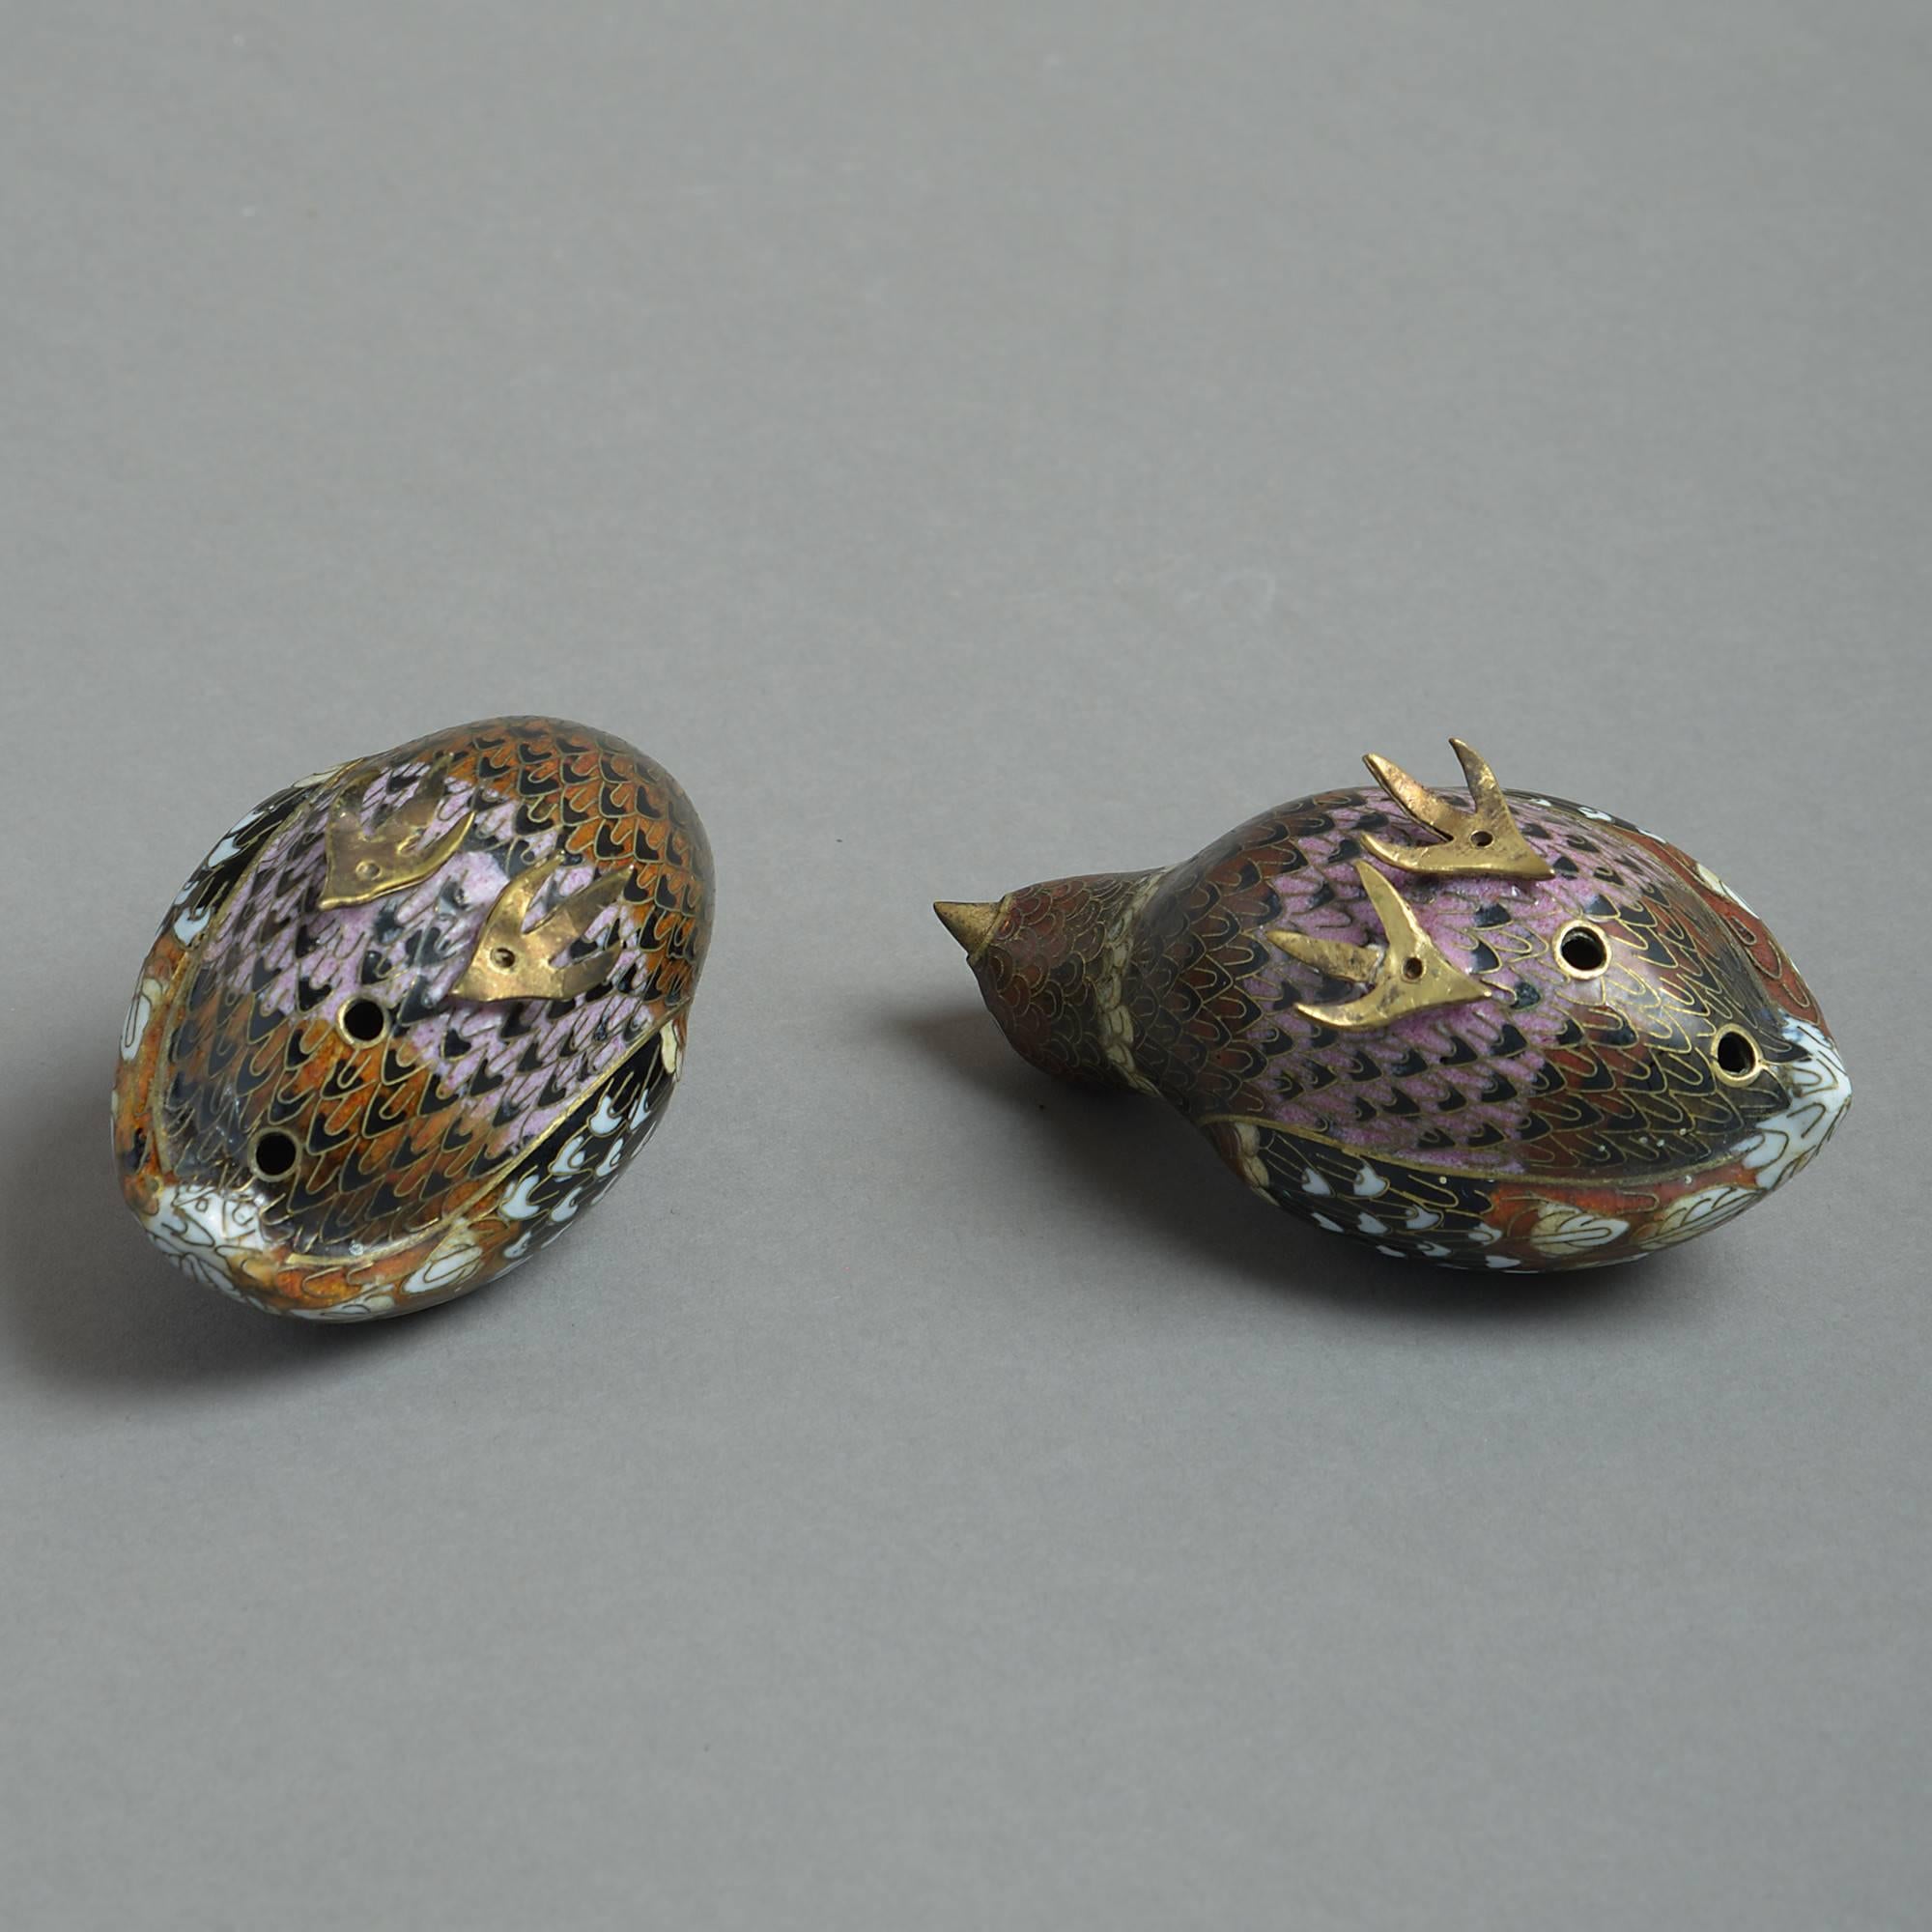 A pair of early 20th century cloisonné quail, the bodies with polychrome enameled decoration in brown, black, pink and white, having brass beaks and feet.
Republic period (1912-1949).